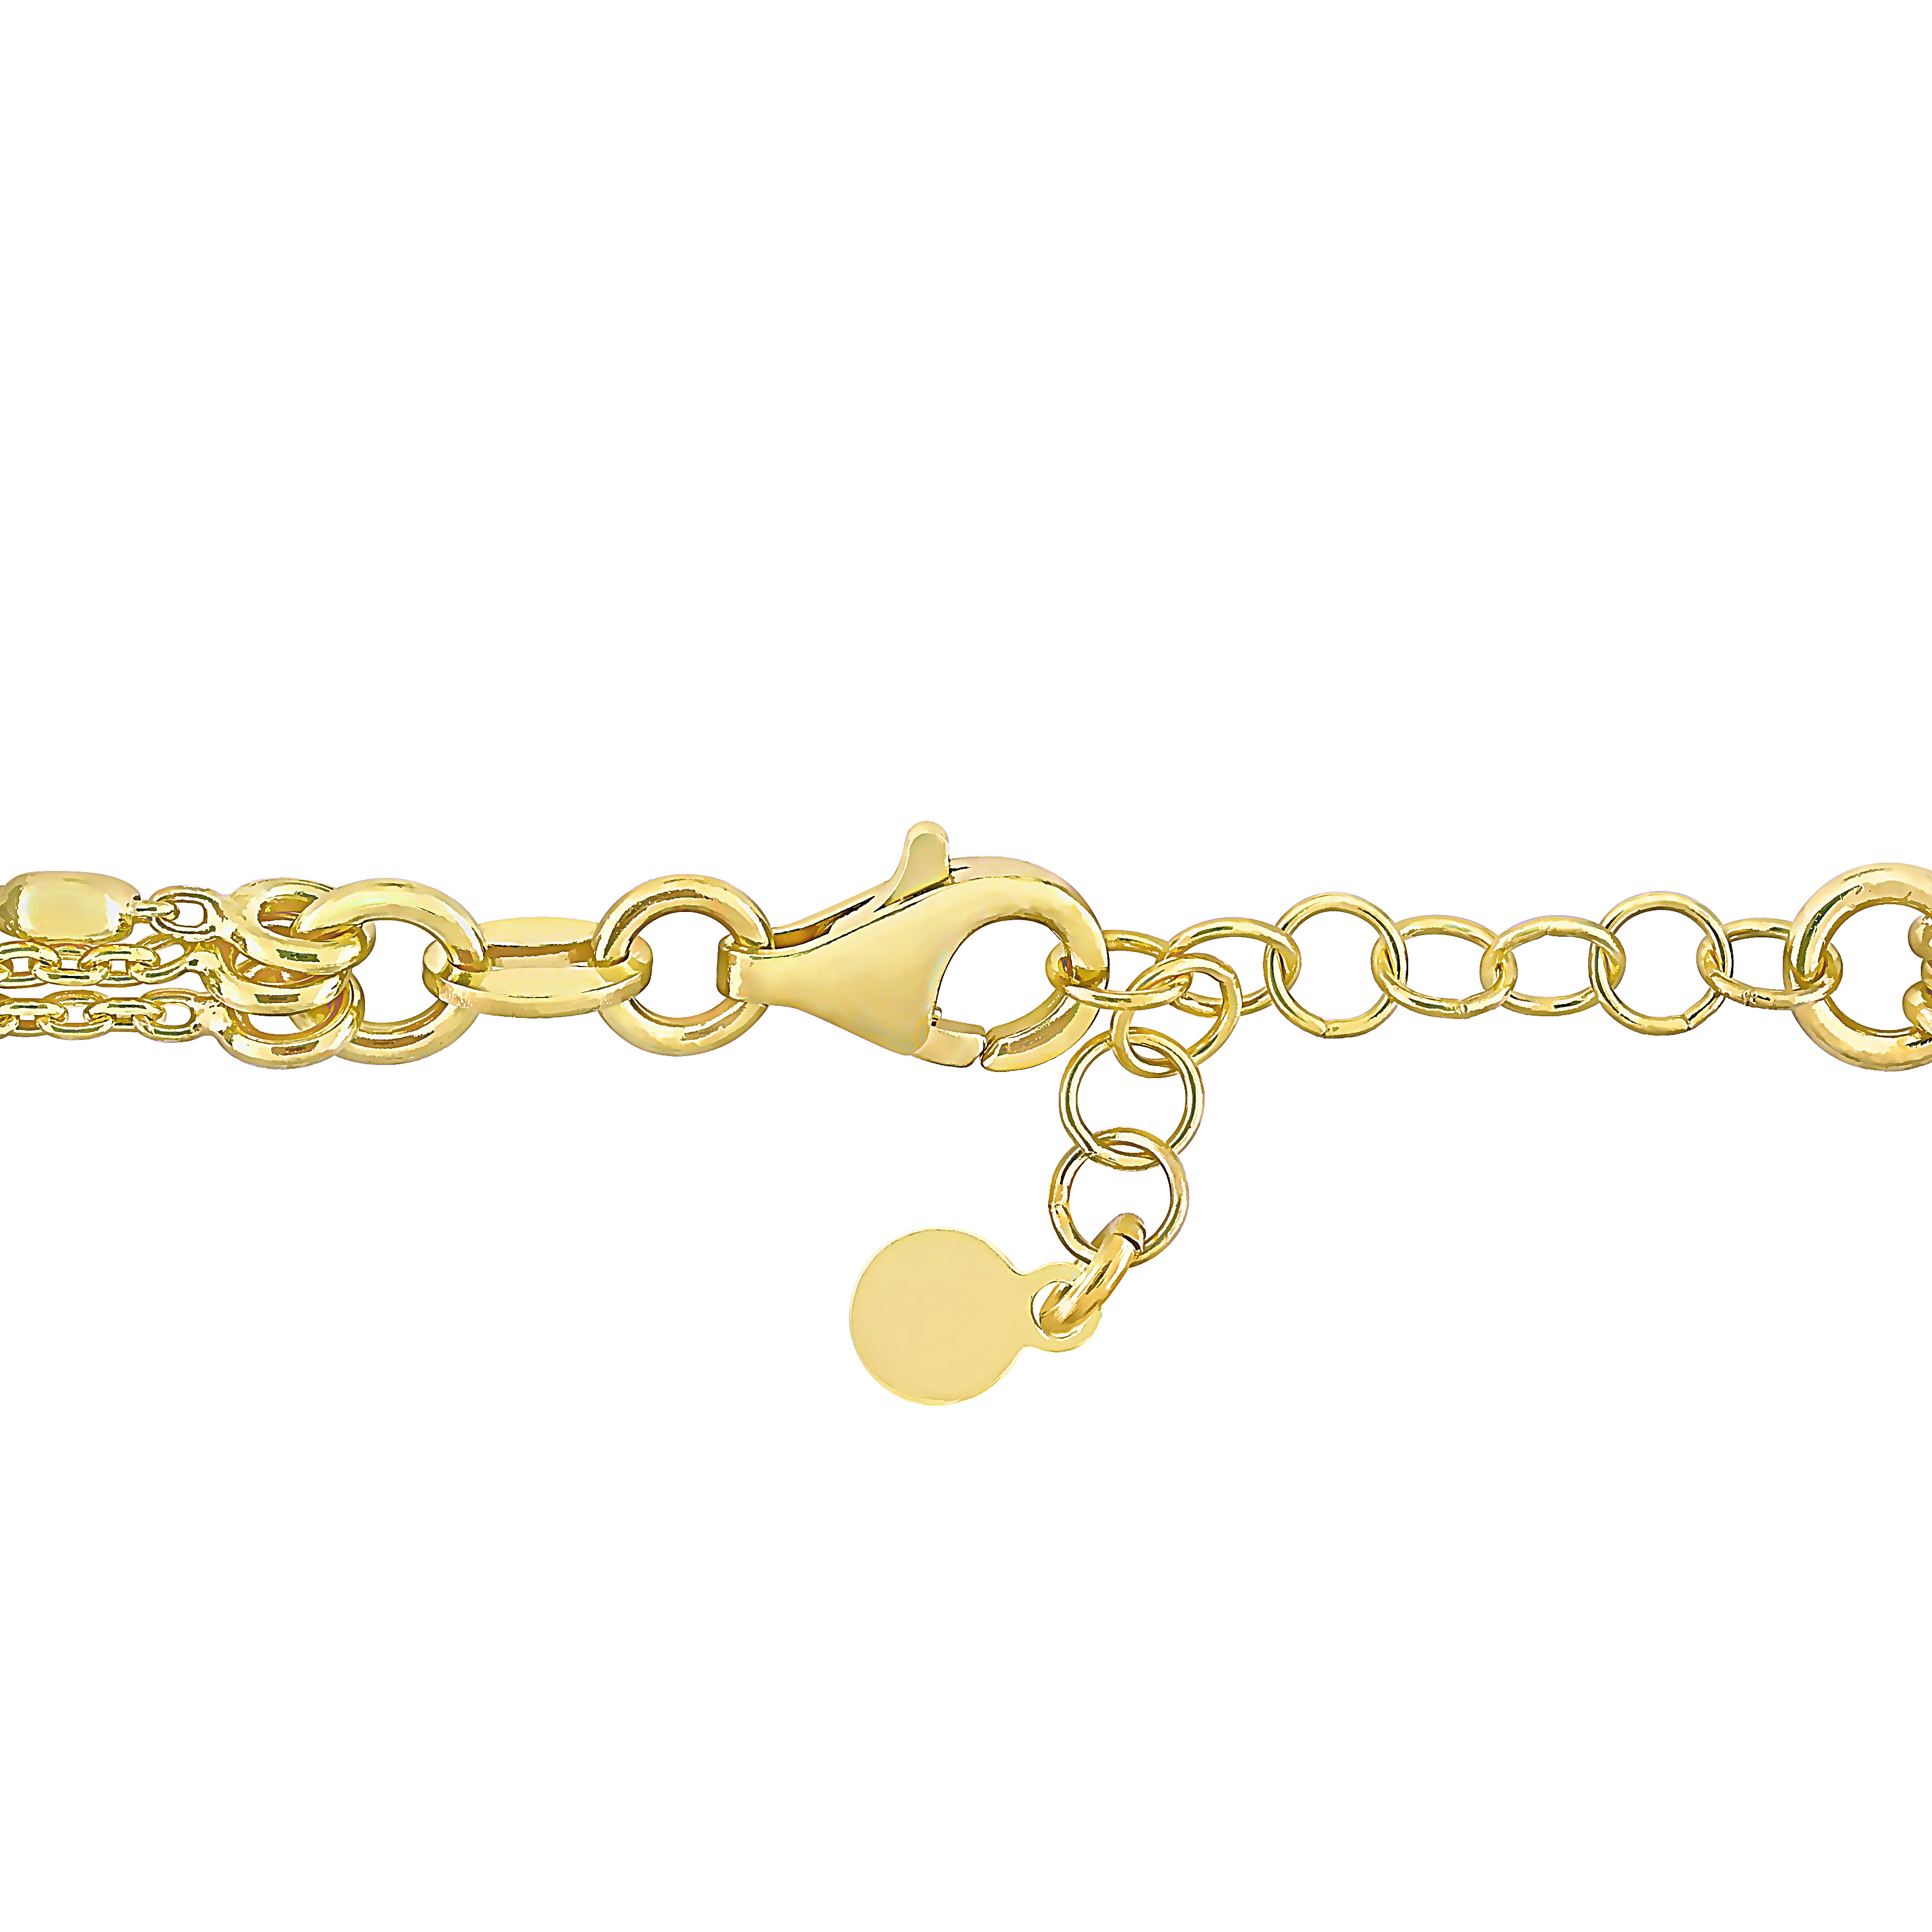 Multi-Strand Chain Bracelet in Yellow Plated Sterling Silver - 7.5 in.